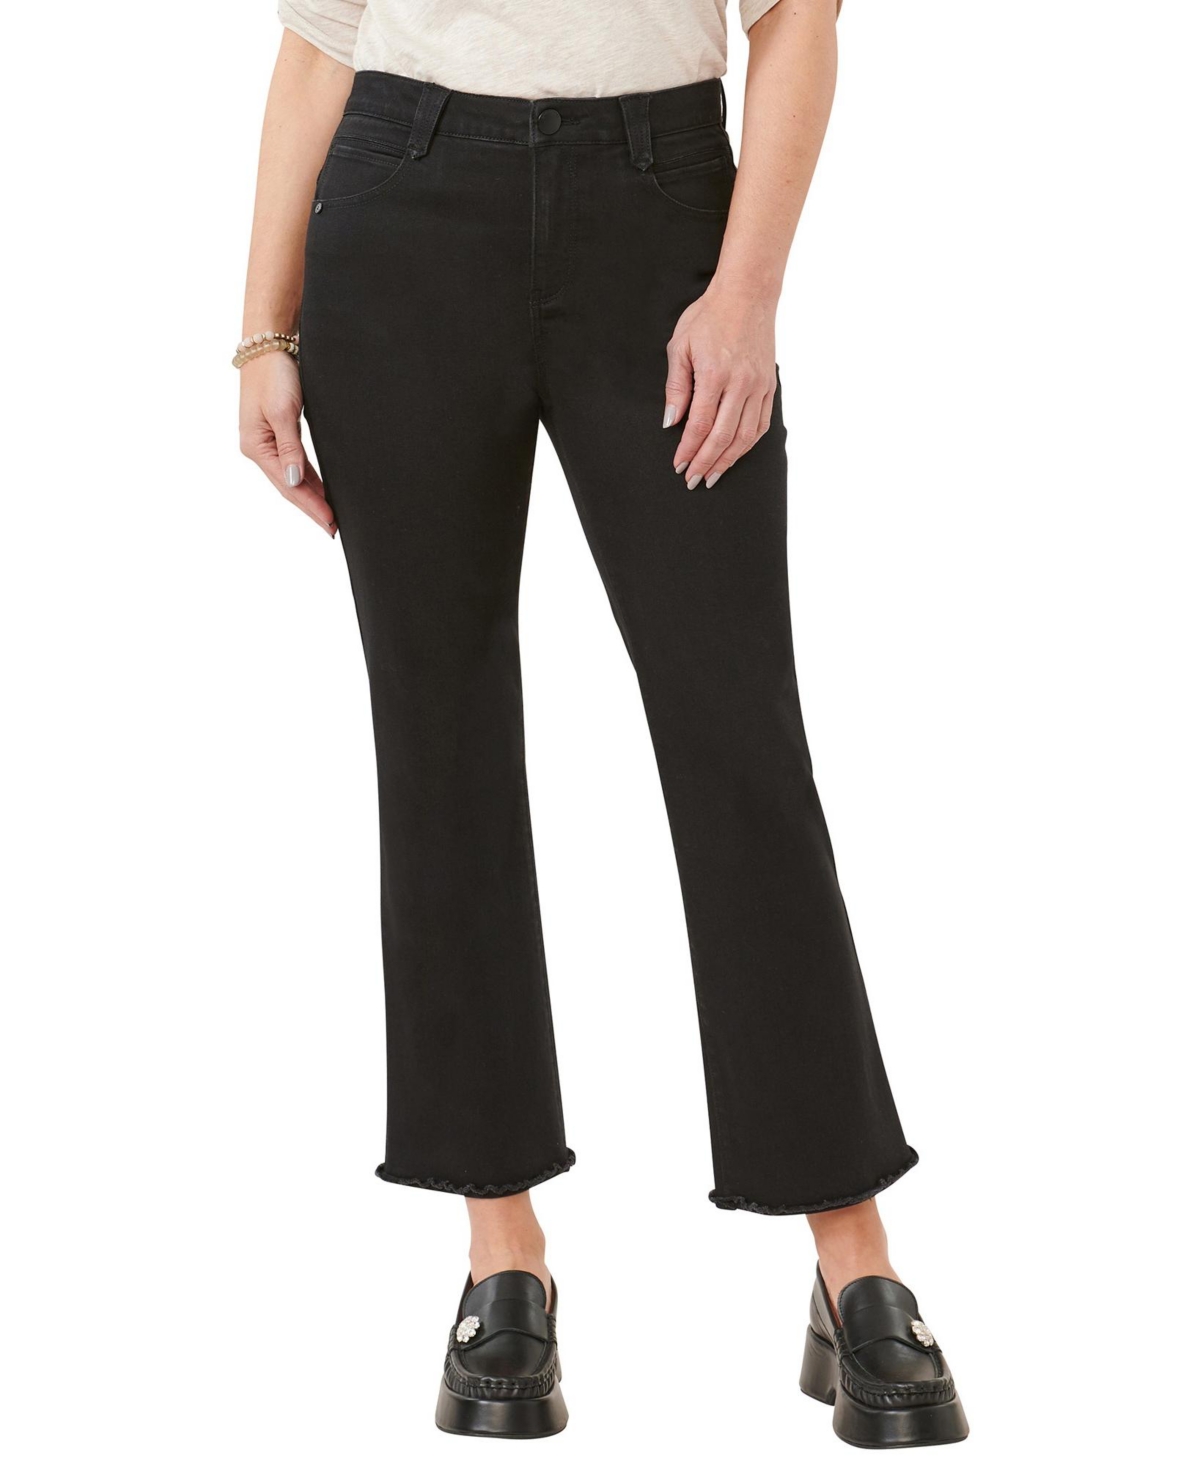 Women's "Ab" Solution Cropped Itty Bitty Flare Jeans - Black